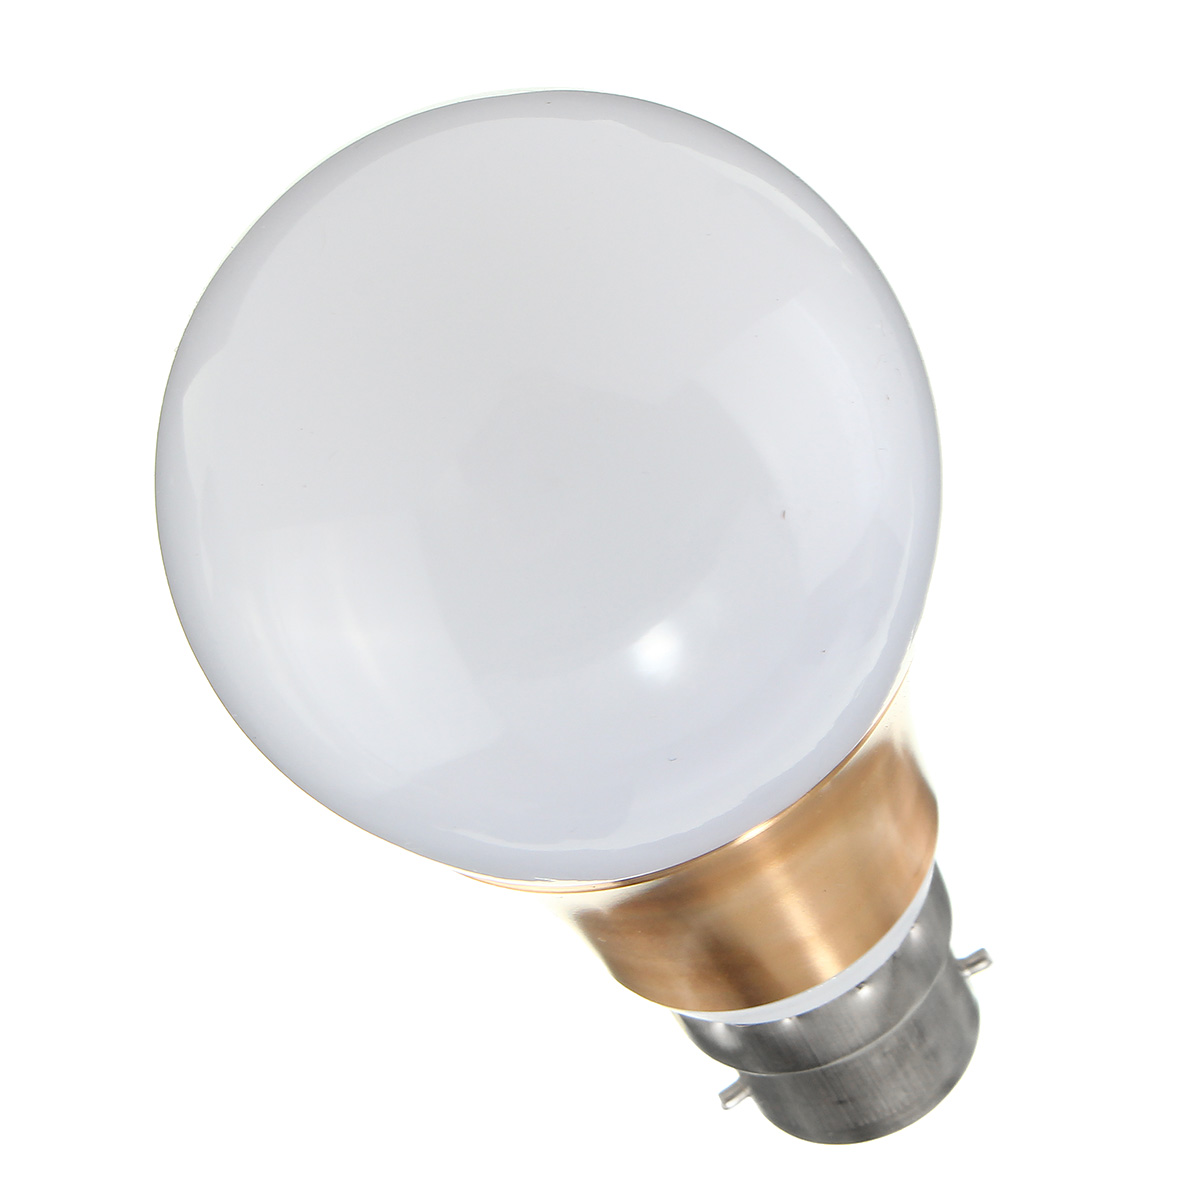 E27-B22-5W-5730-SMD-450LM-LED-Globe-Light-Bulb-Home-Lamp-Decoration-Non-dimmable-AC85-265V-1145768-6